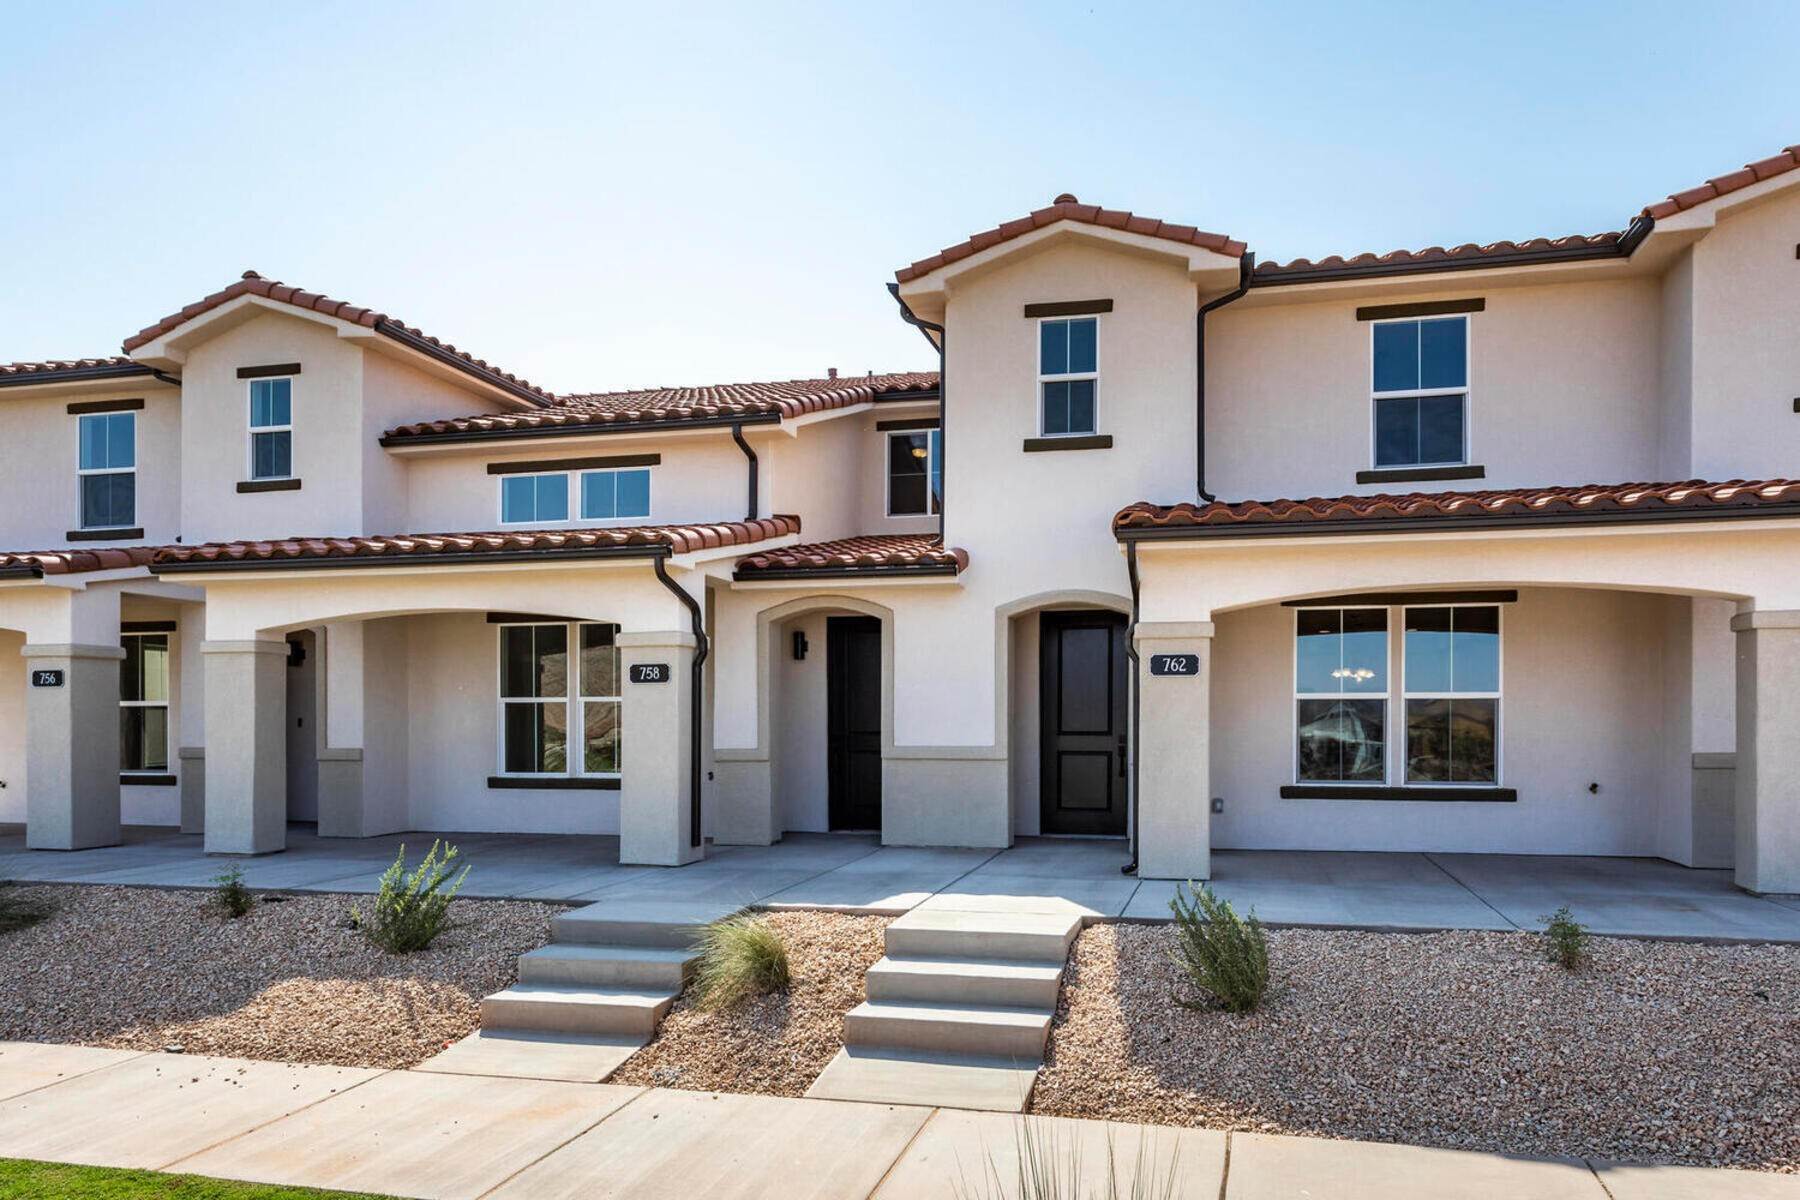 36. Townhouse for Sale at New Southwestern Contemporary Townhomes with Incredible Amenities in St. George 694 W. Claystone Drive (Lot 13) St. George, Utah 84790 United States